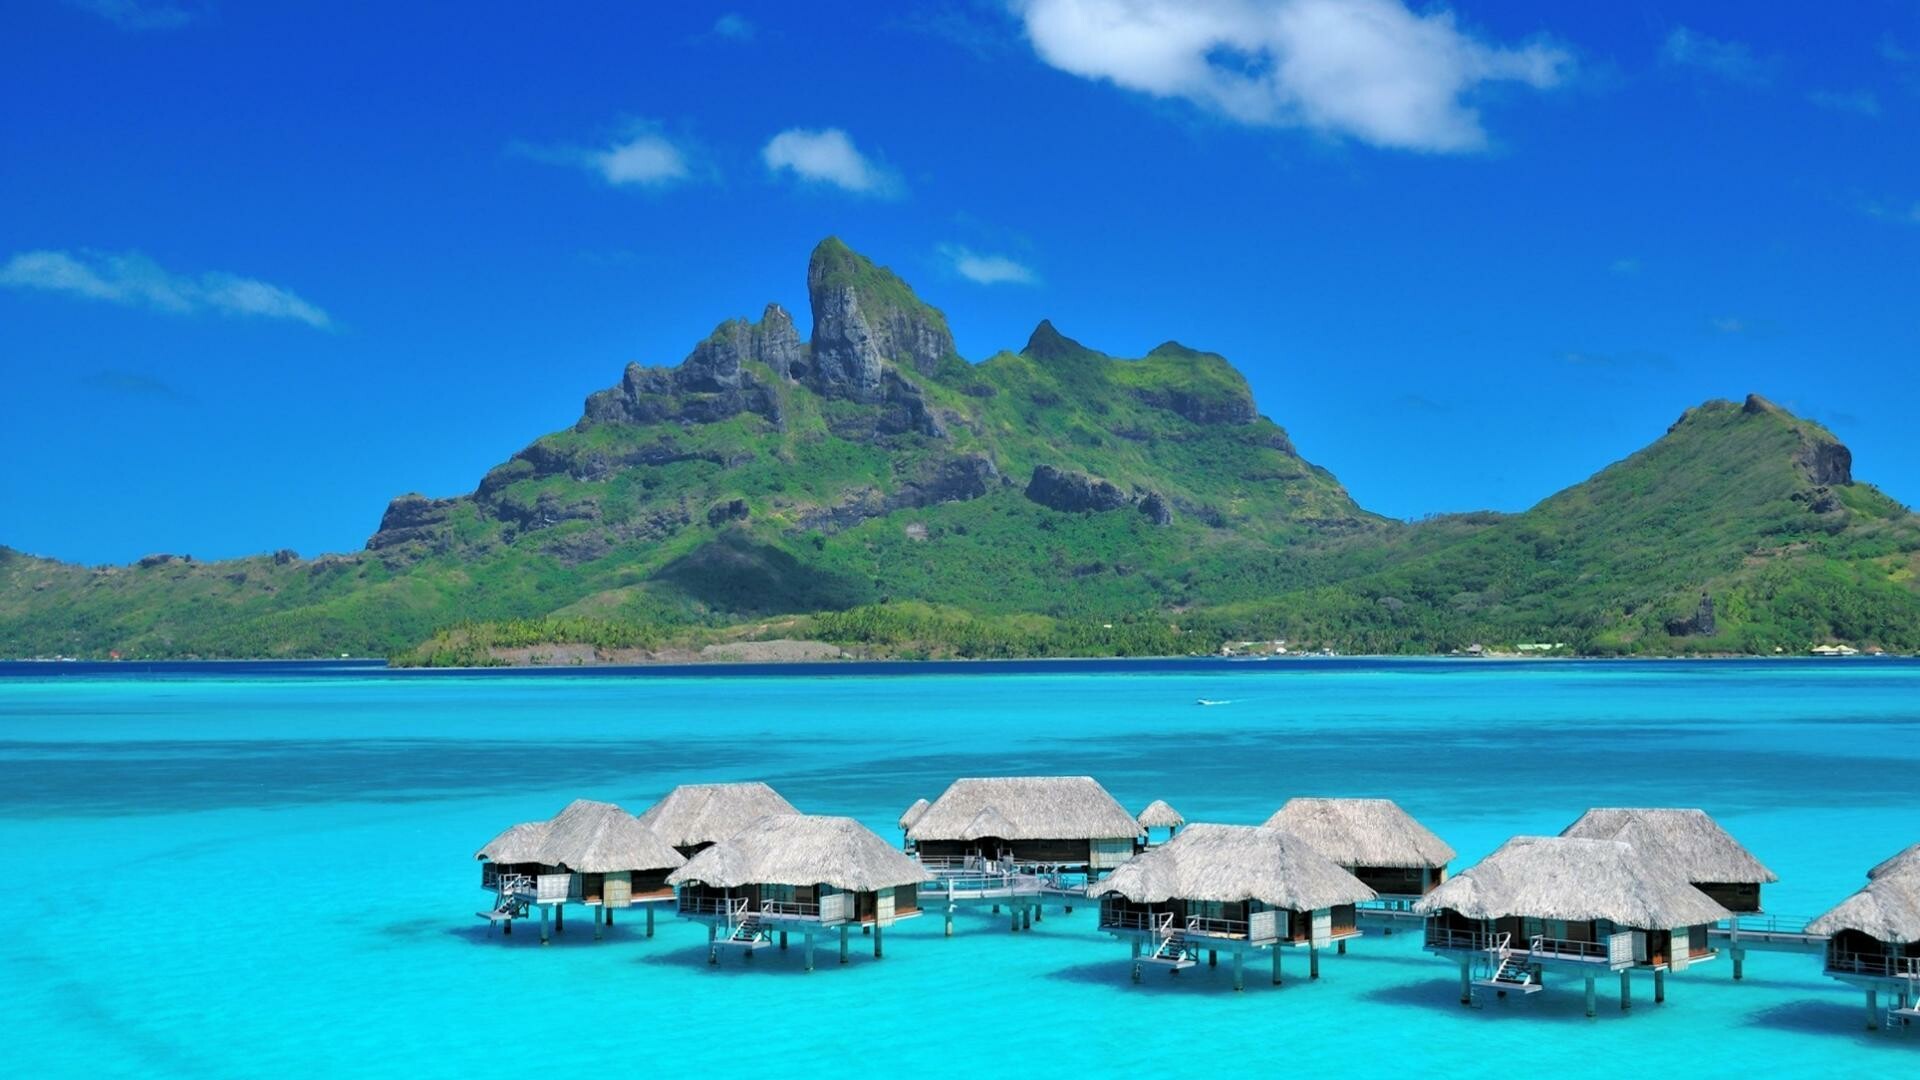 Tahiti: The largest of the 118 islands and atolls, French Polynesia, Azure lagoon. 1920x1080 Full HD Wallpaper.